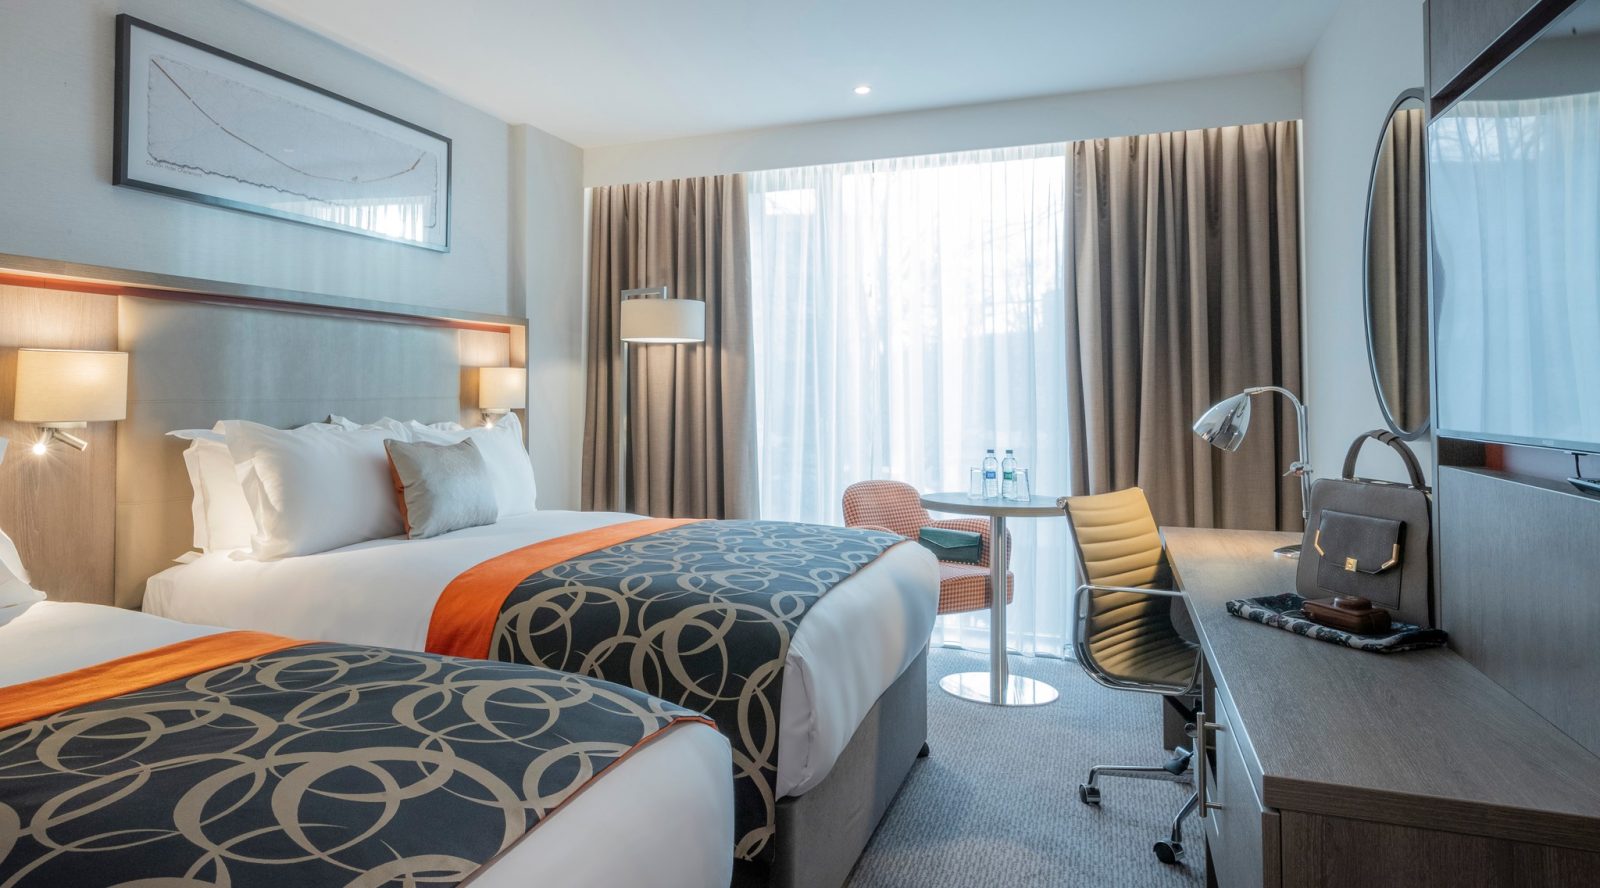 A new £45 million 18-storey luxury hotel has opened in Manchester city centre, The Manc